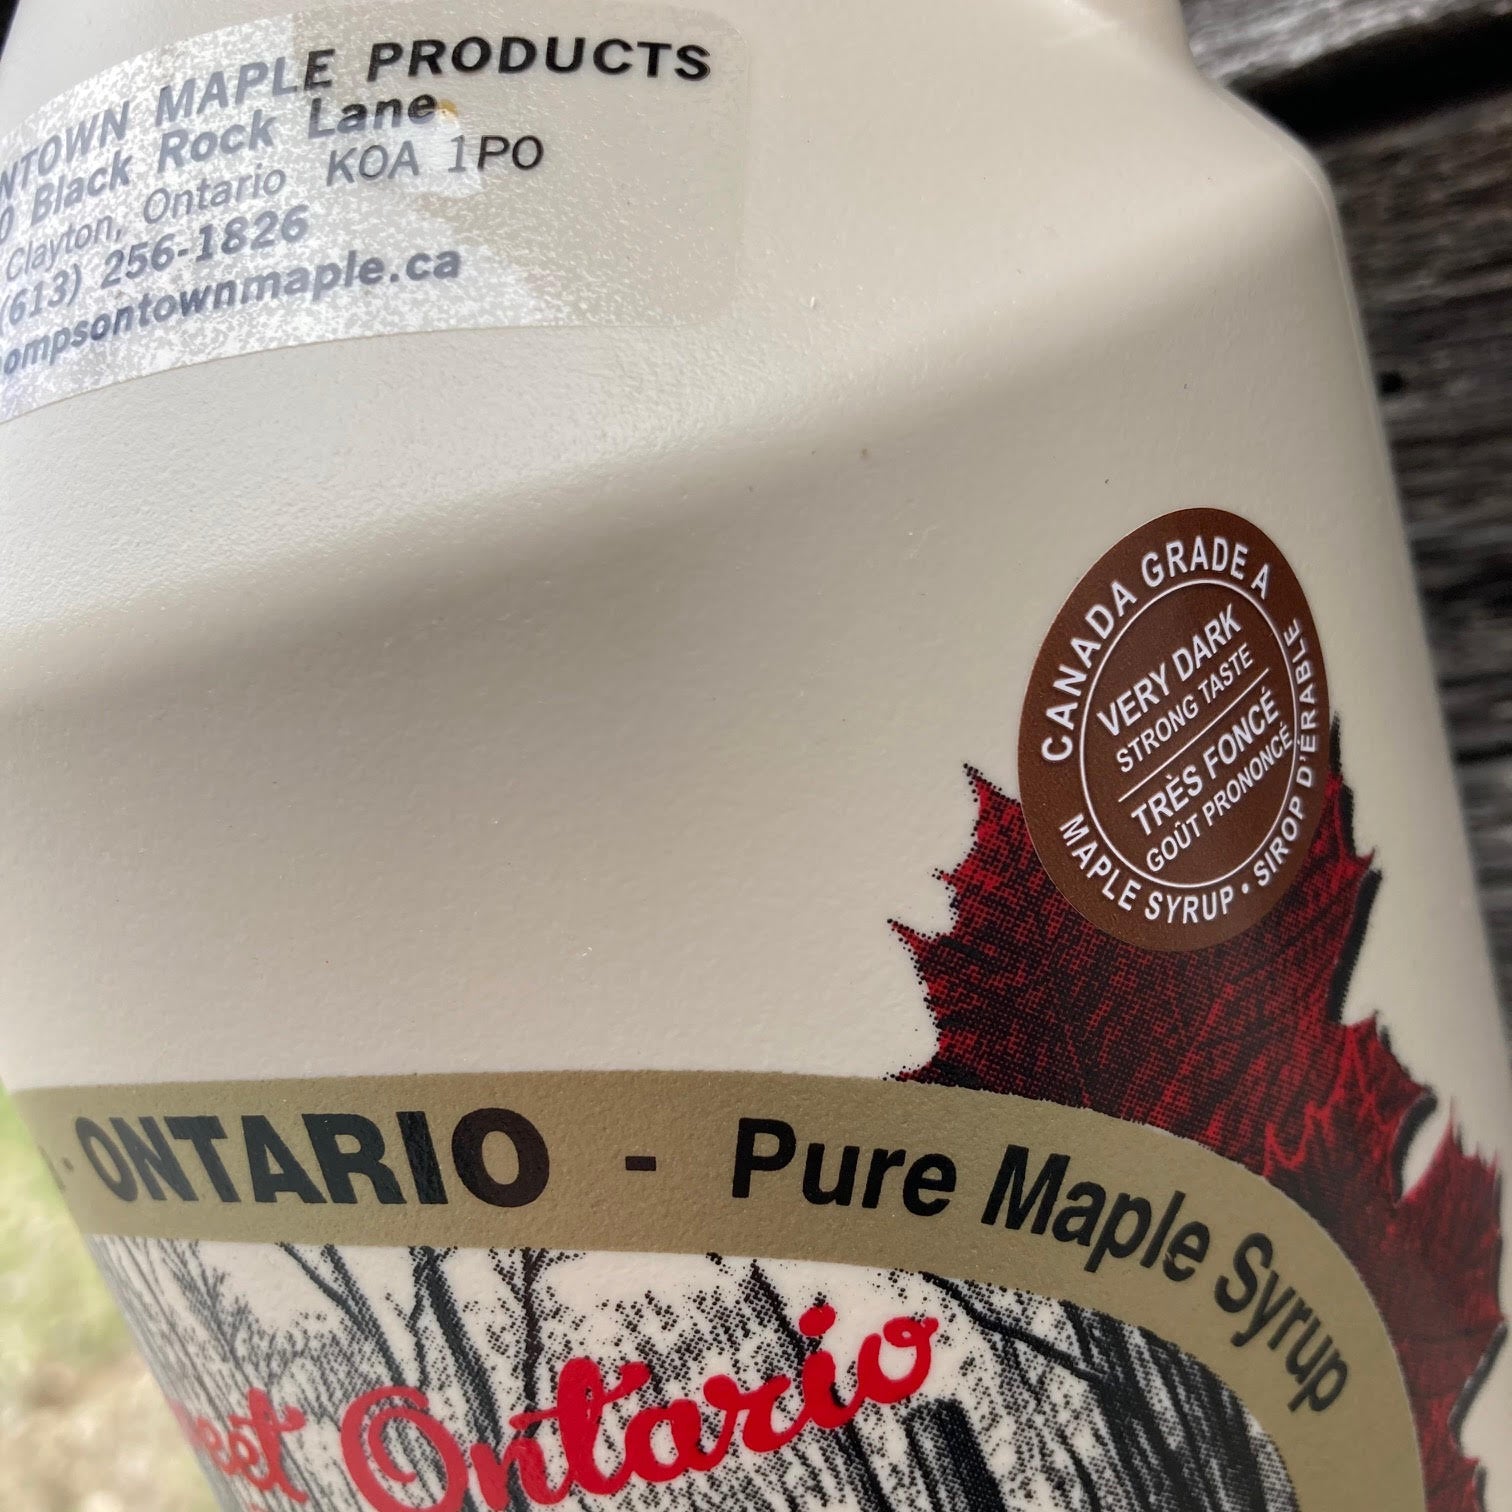 VERY DARK - Pure Thompsontown Maple Syrup-Product of Ontario Canada